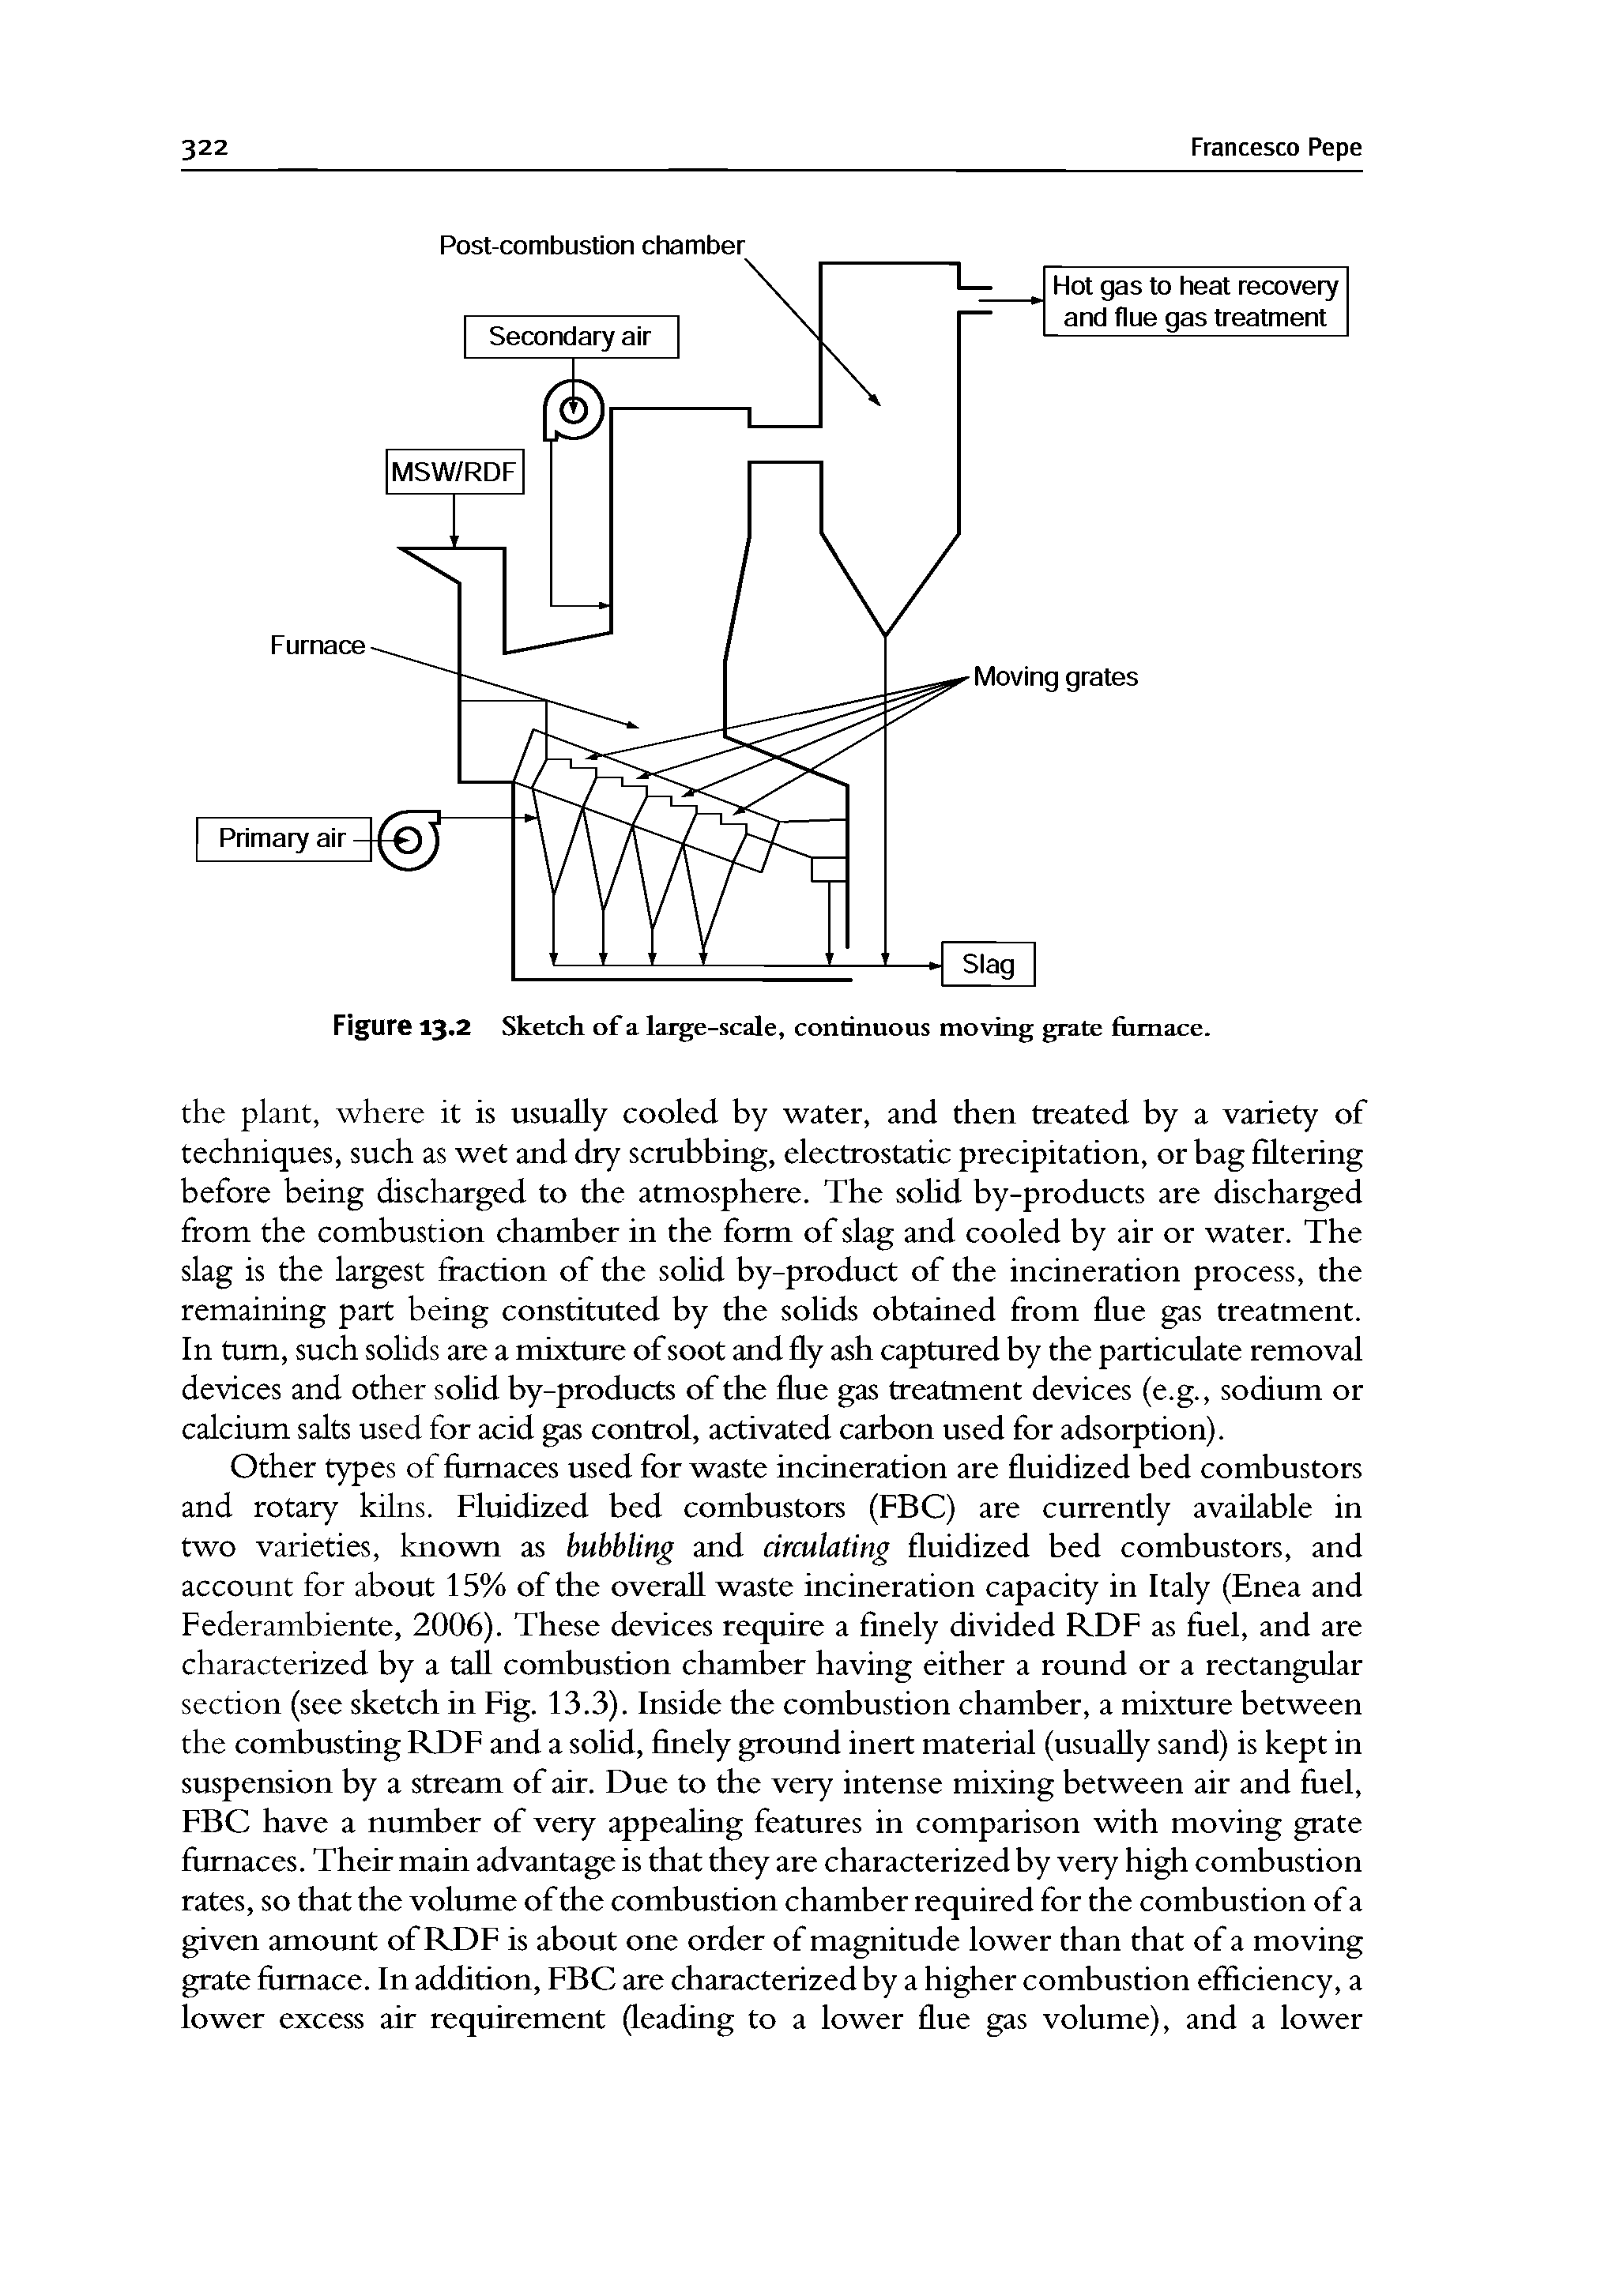 Figure 13.2 Sketch of a large-scale, continuous moving grate furnace.